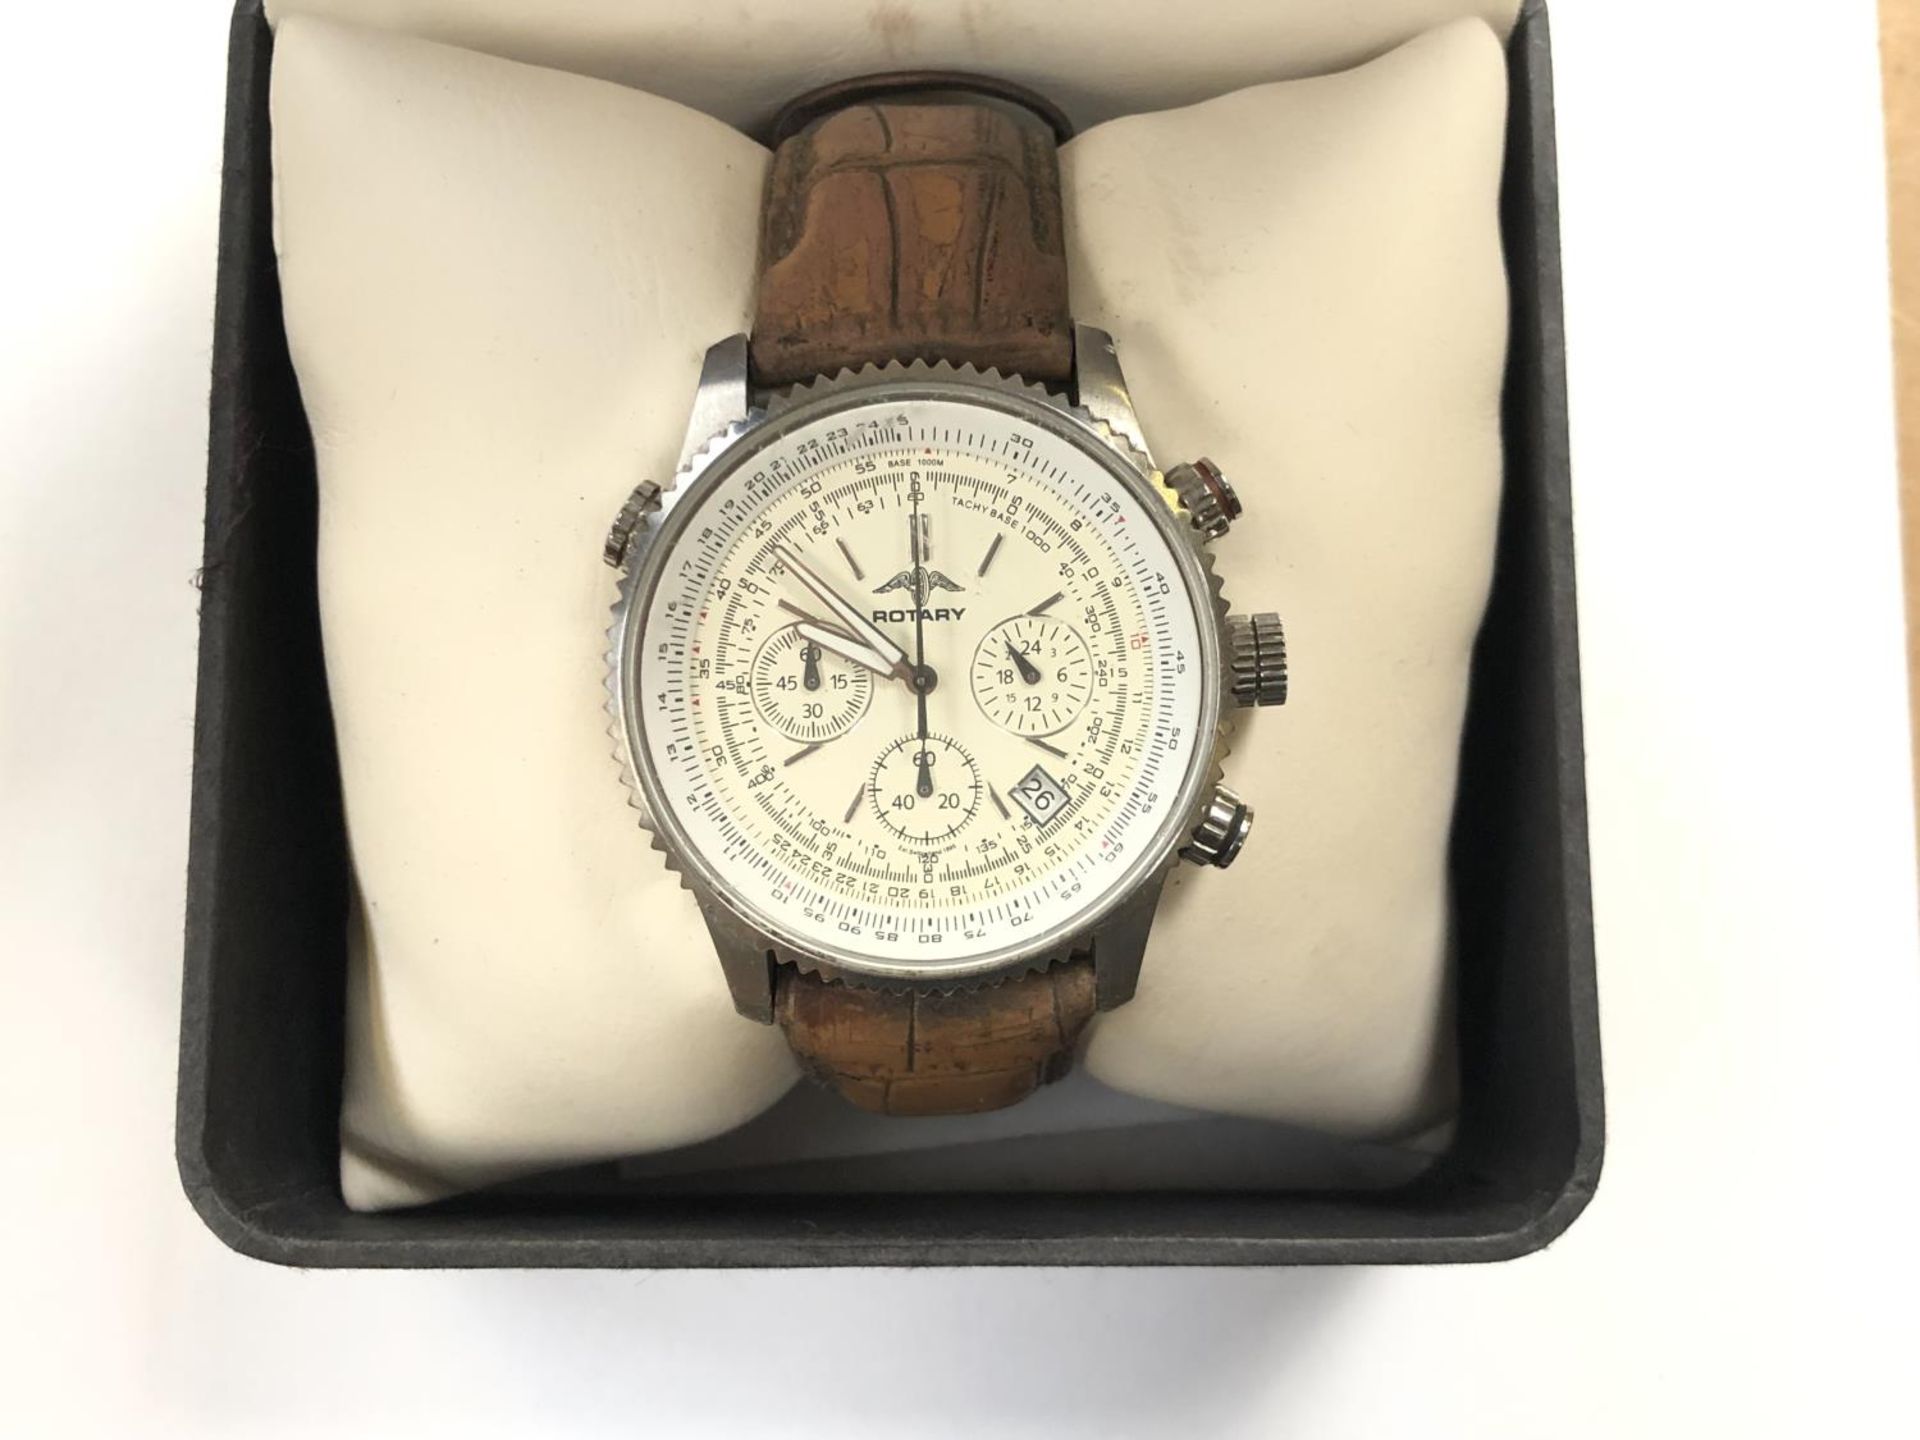 A GENTS 'ROTARY' CHRONOGRAPH WATCH